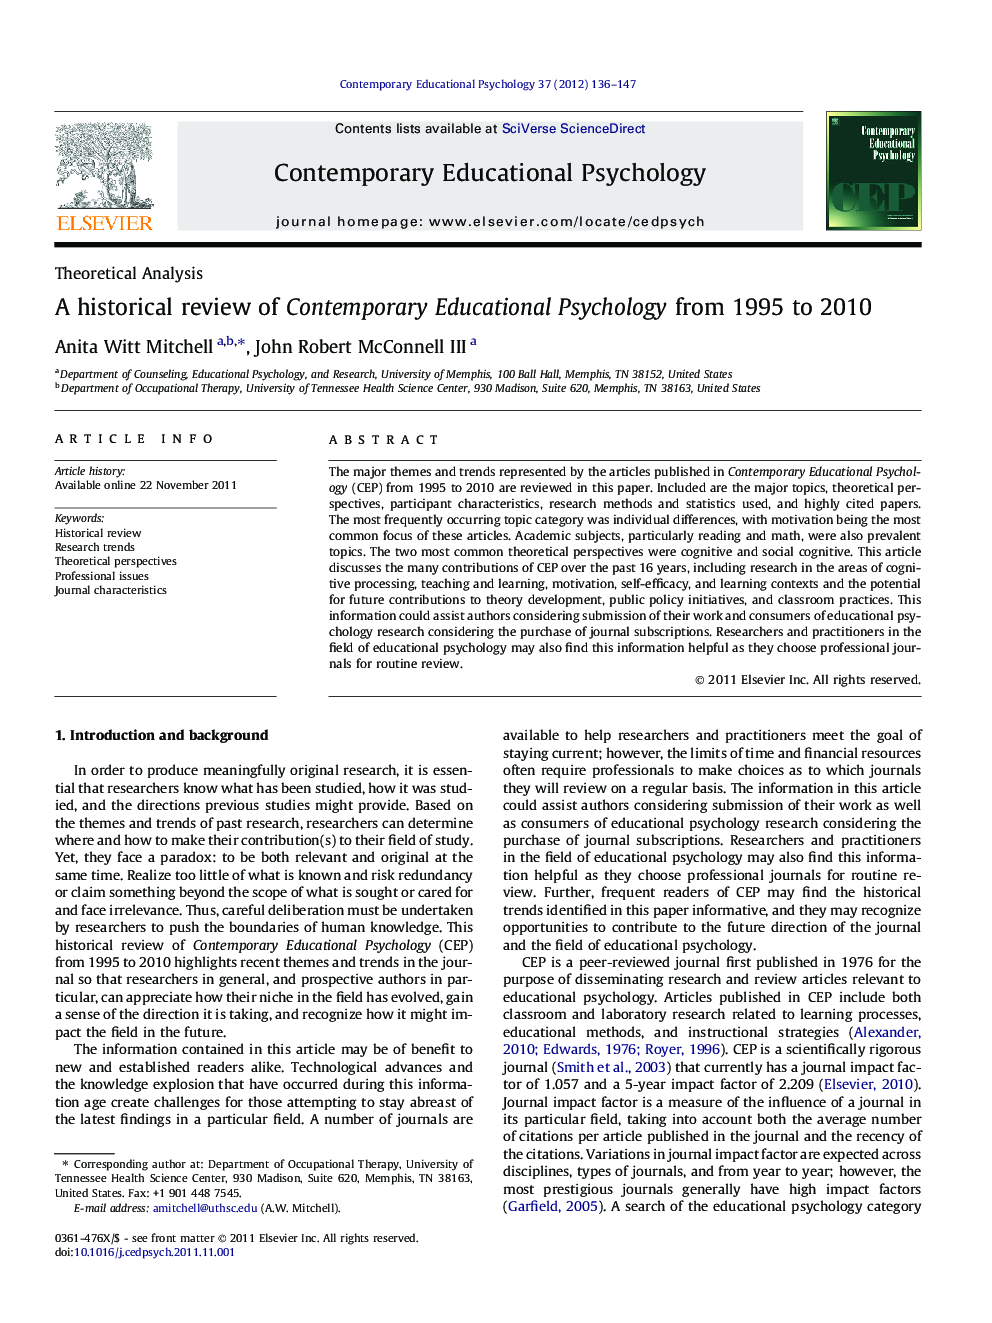 A historical review of Contemporary Educational Psychology from 1995 to 2010